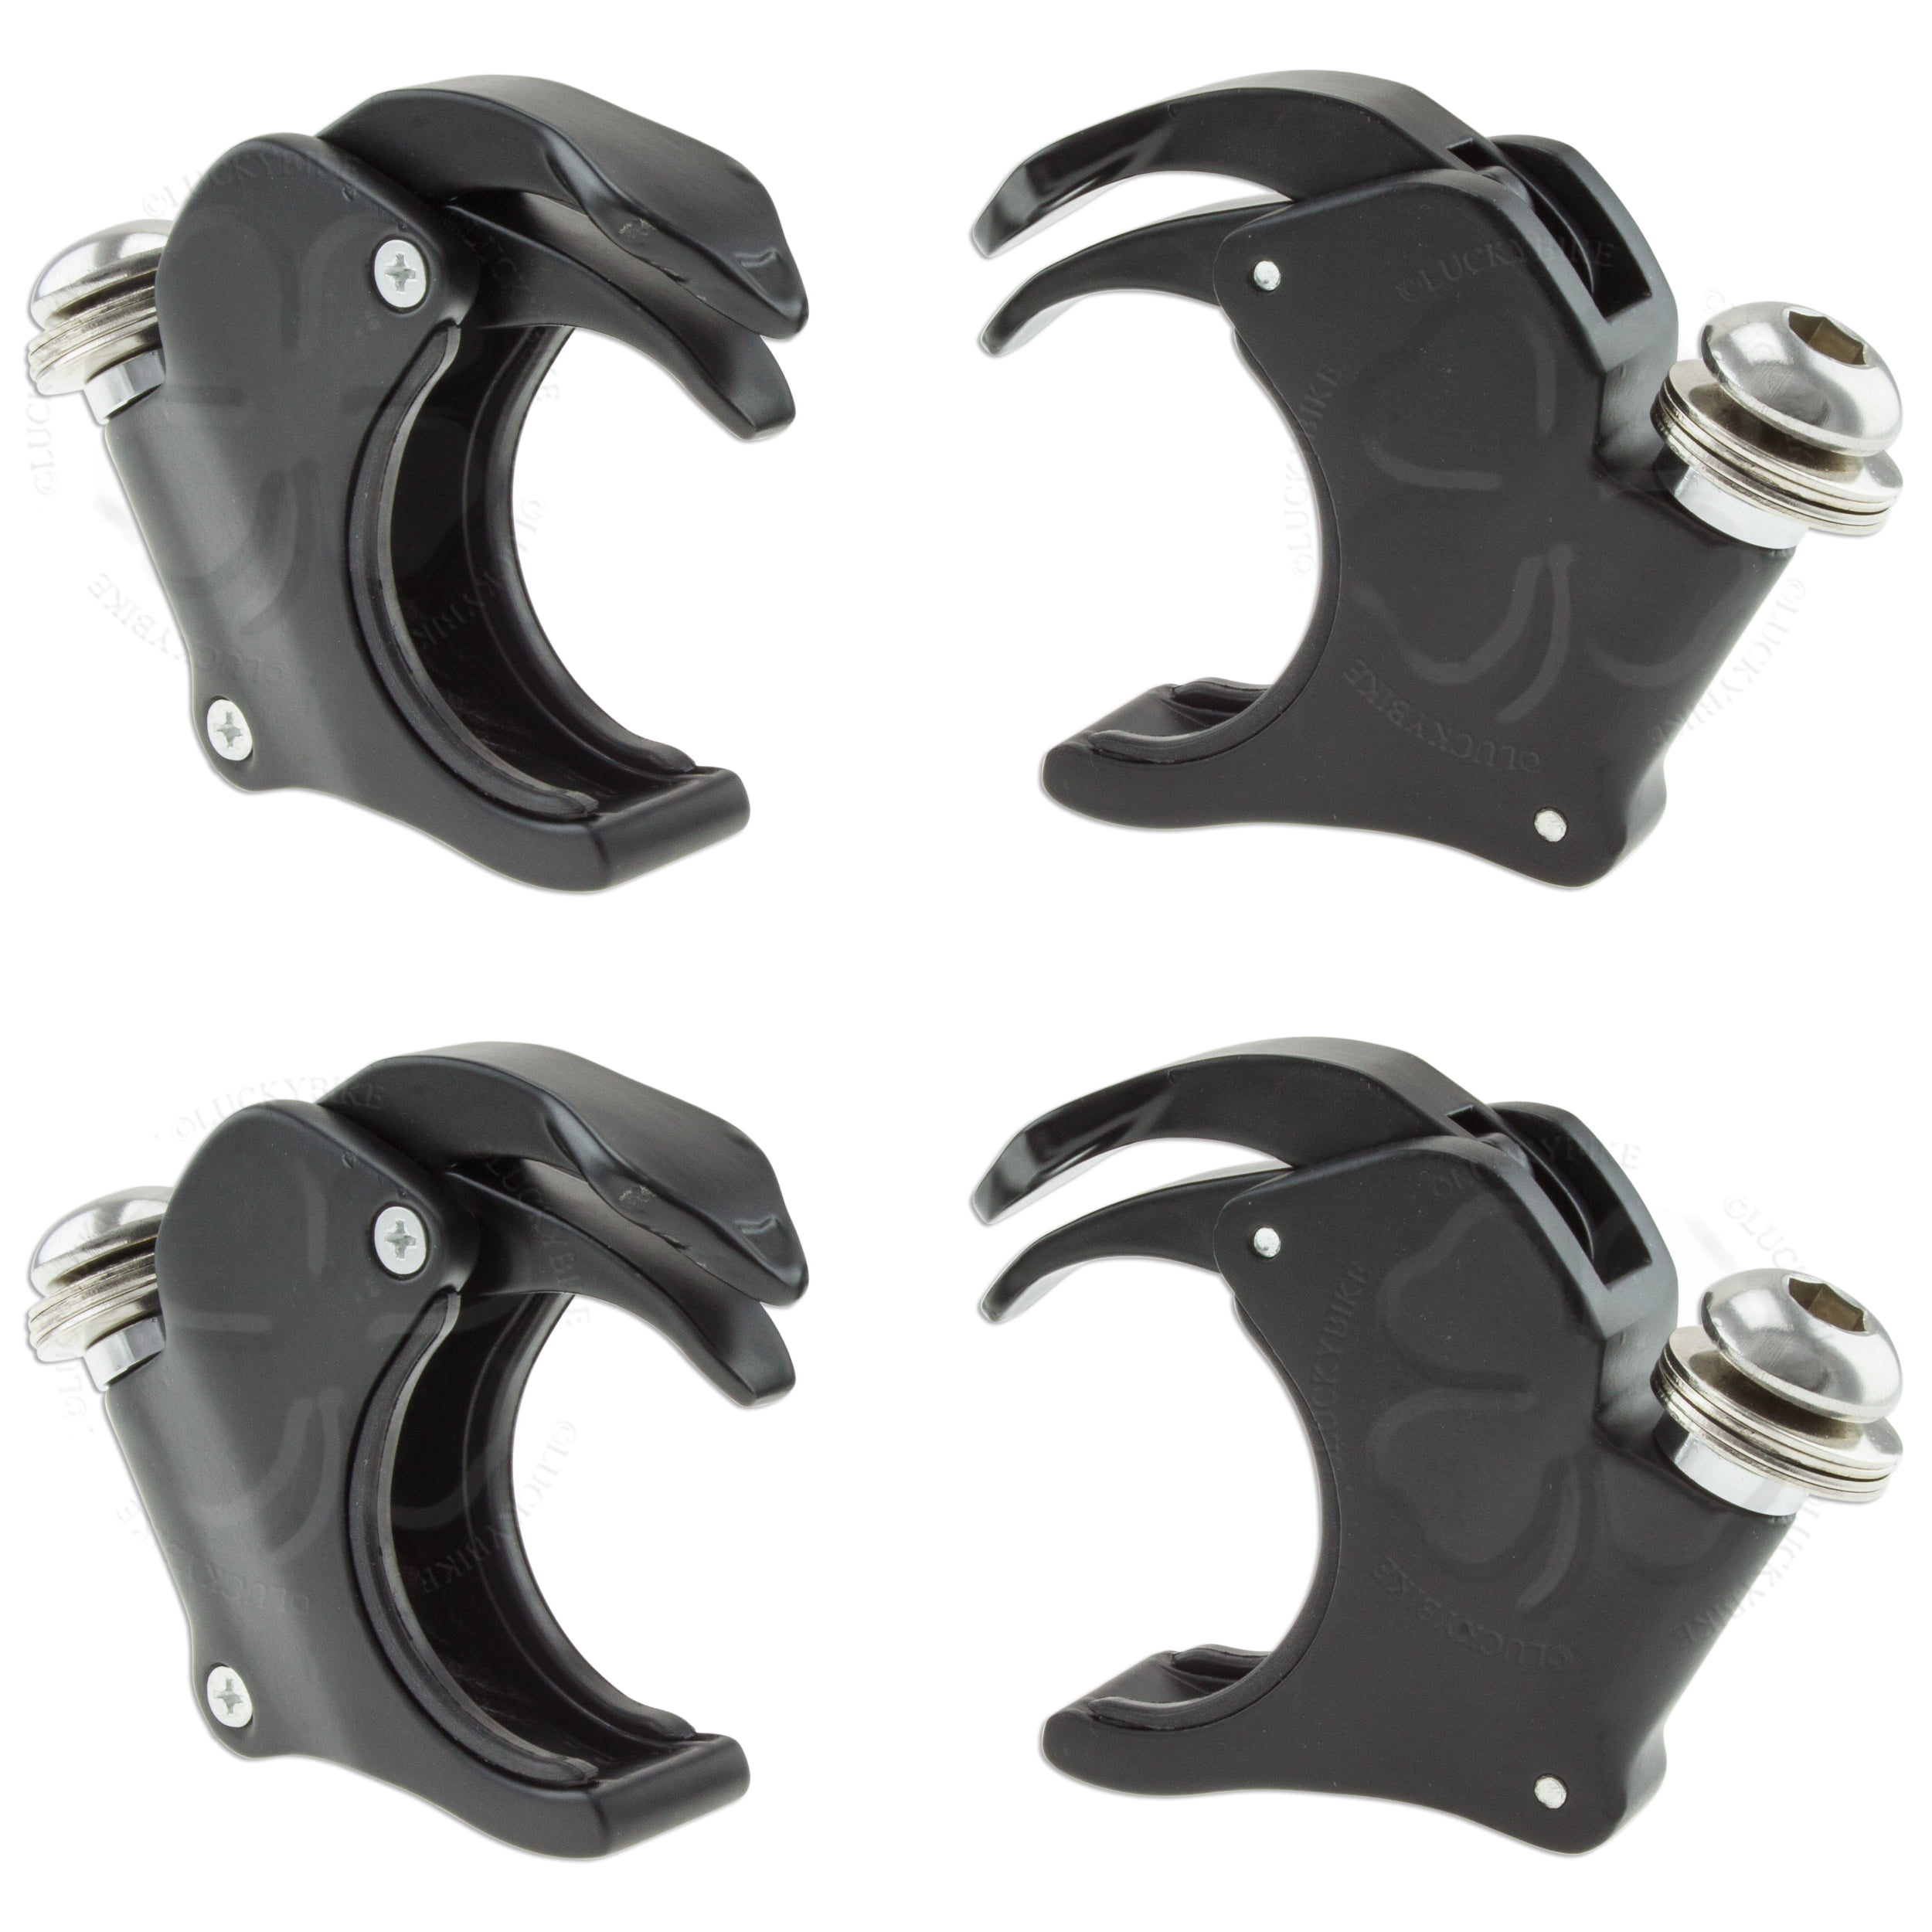 XMT-MOTO 1.54 inch/39mm Quick Release Windshield Clamp fits for Harley Davidson Models